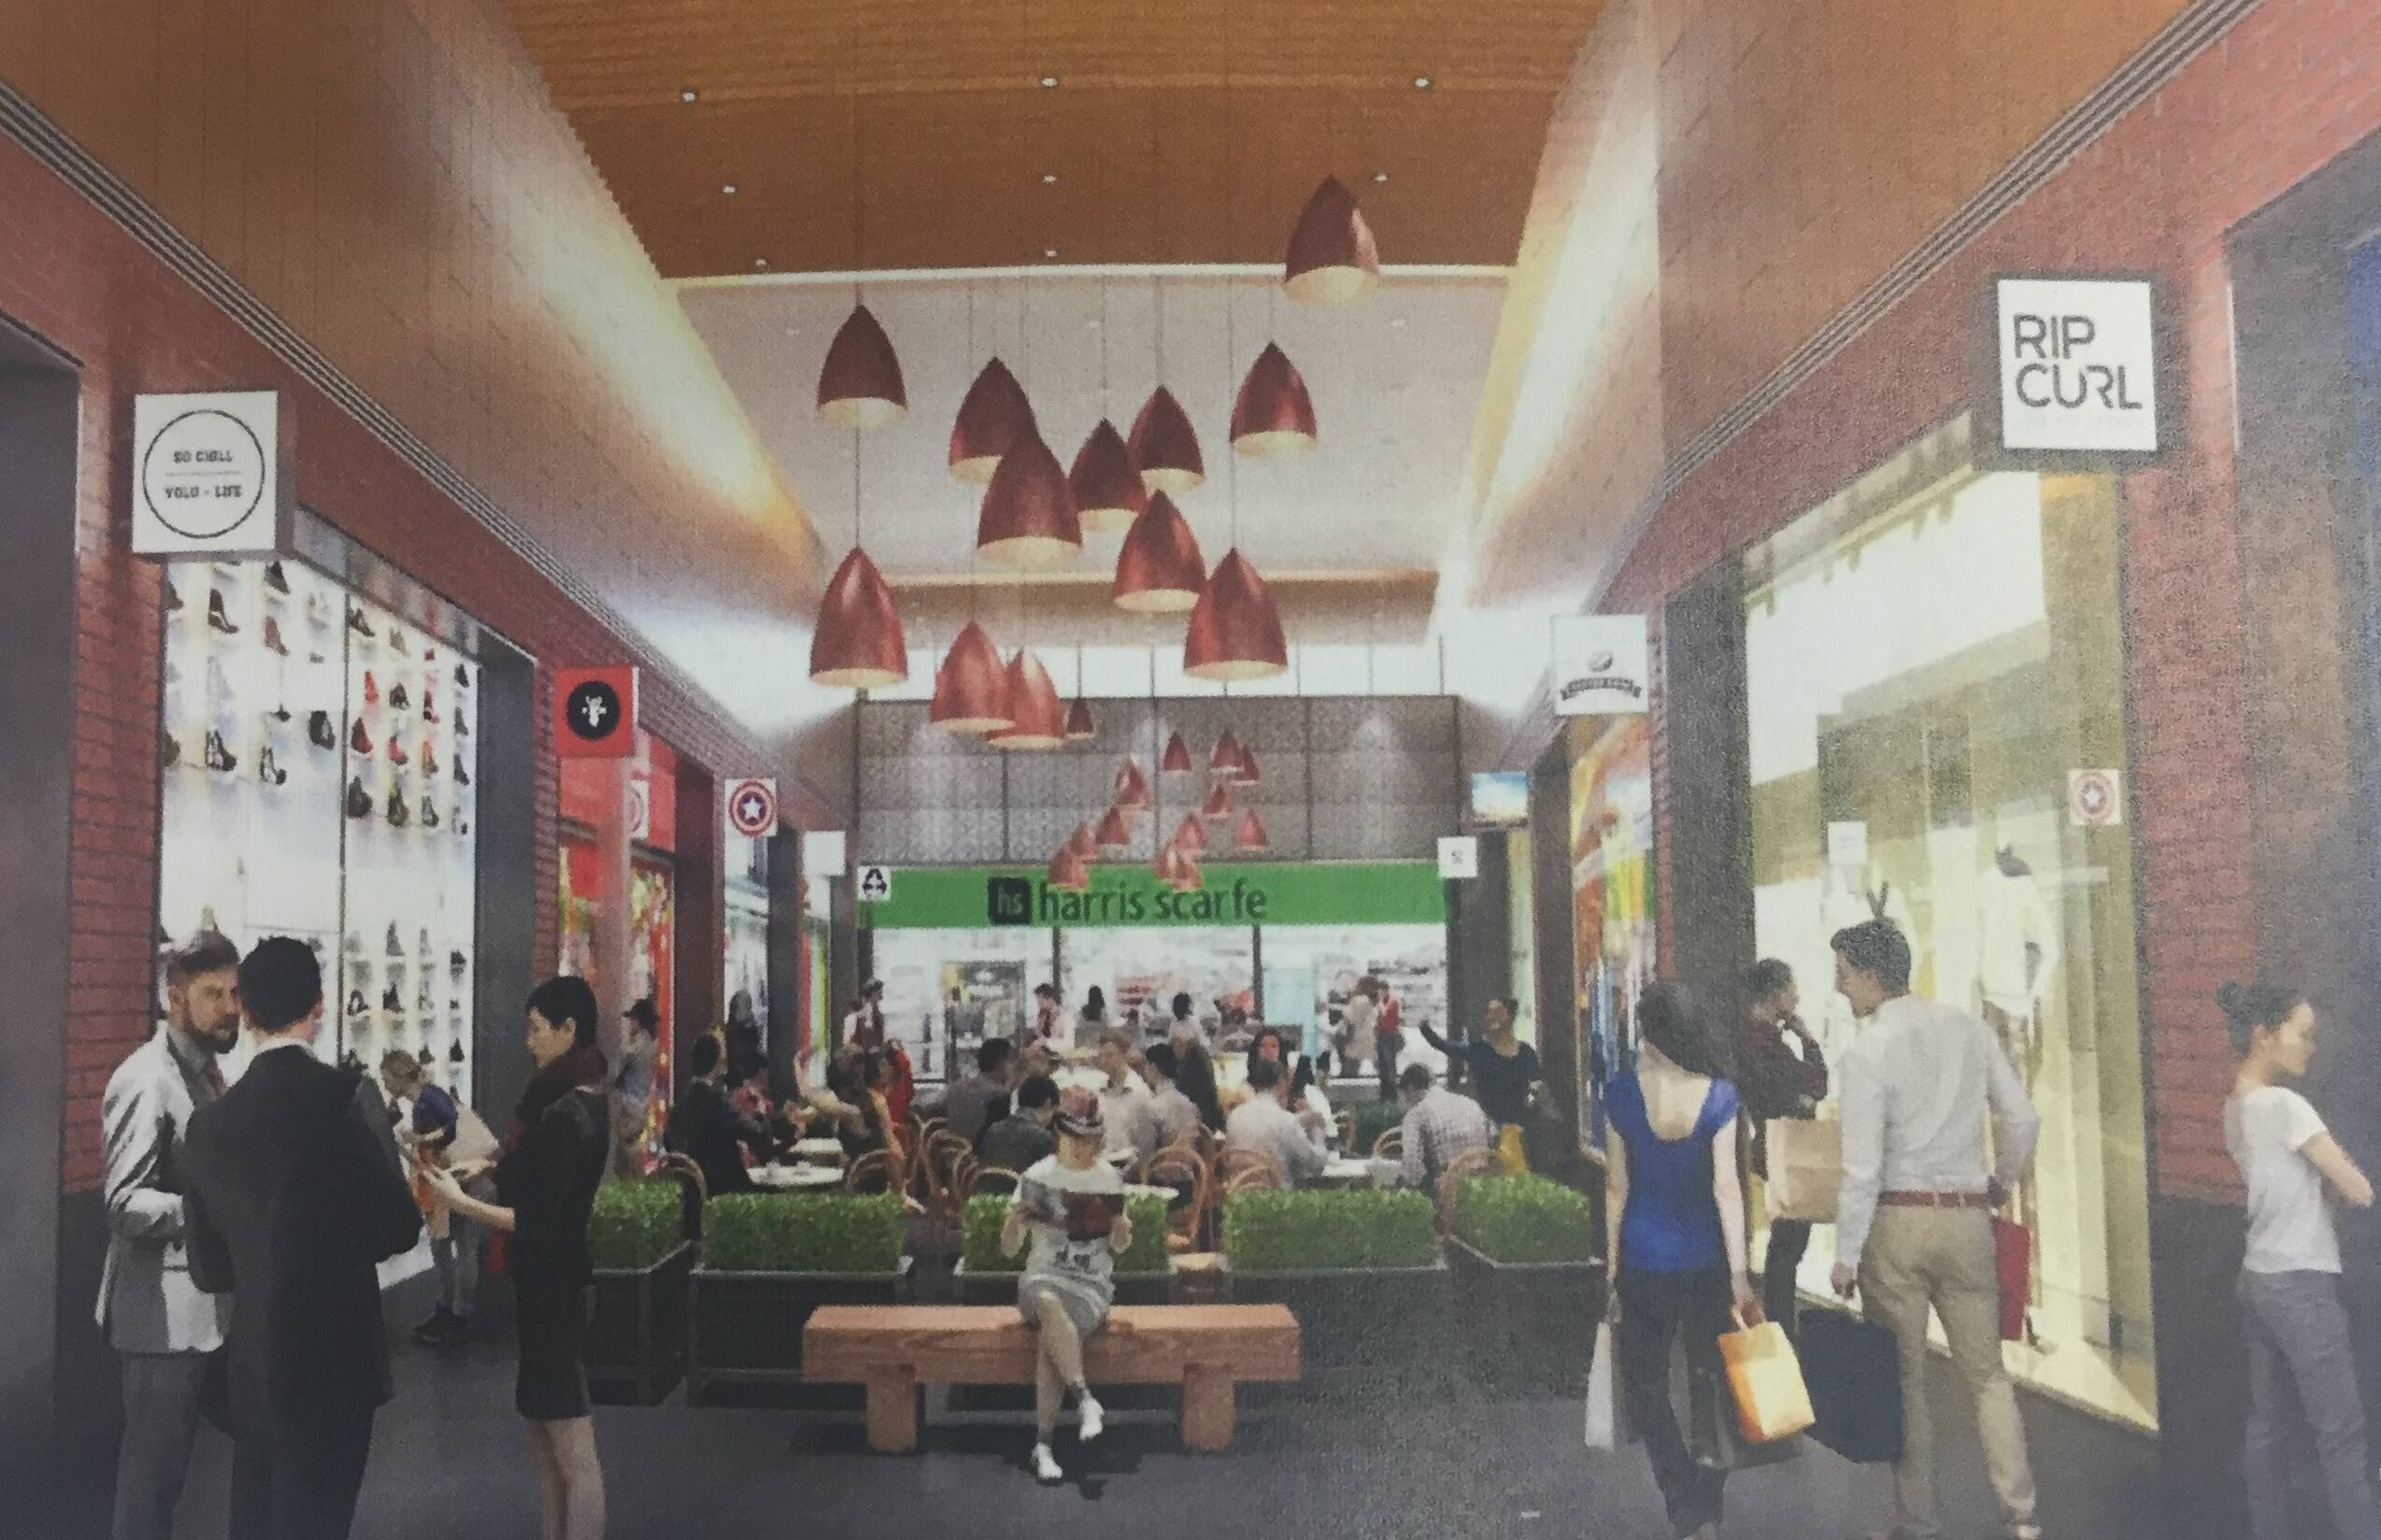 Starting over: three specialty shops cut from revised Myer redevelopment, Poll, Central Western Daily